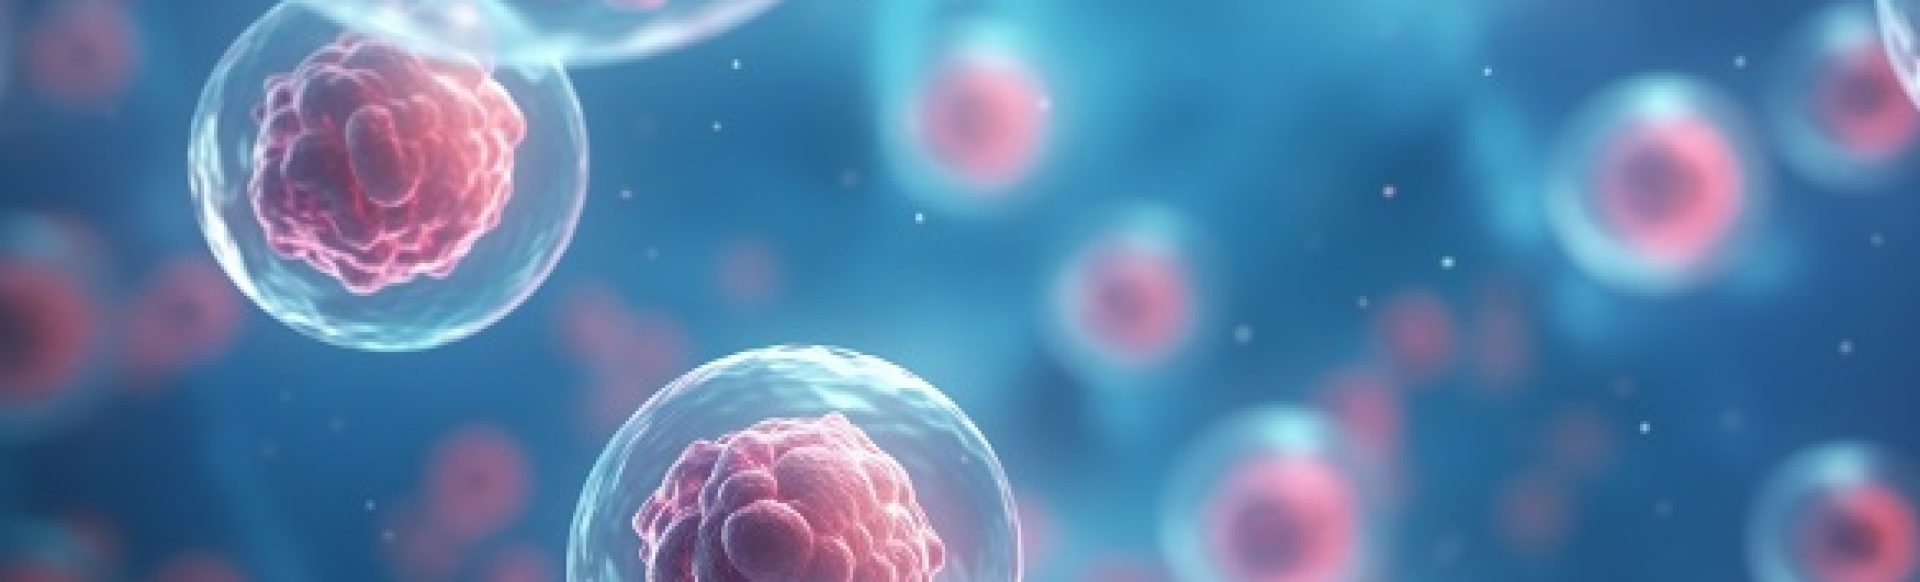 Human cell or embryonic stem cell scientific background